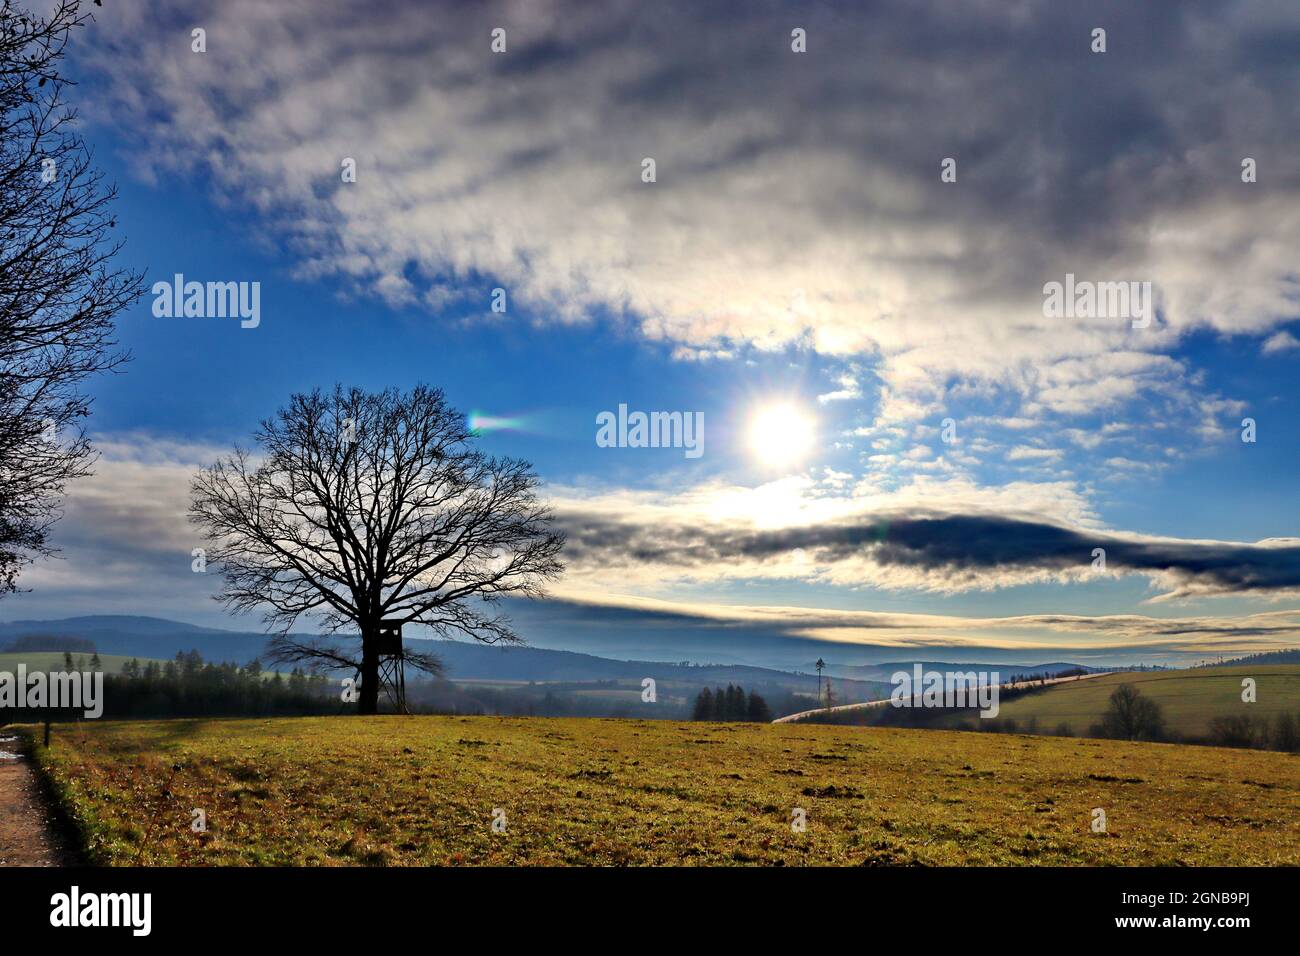 Inhabited tree in the middle of a field Stock Photo